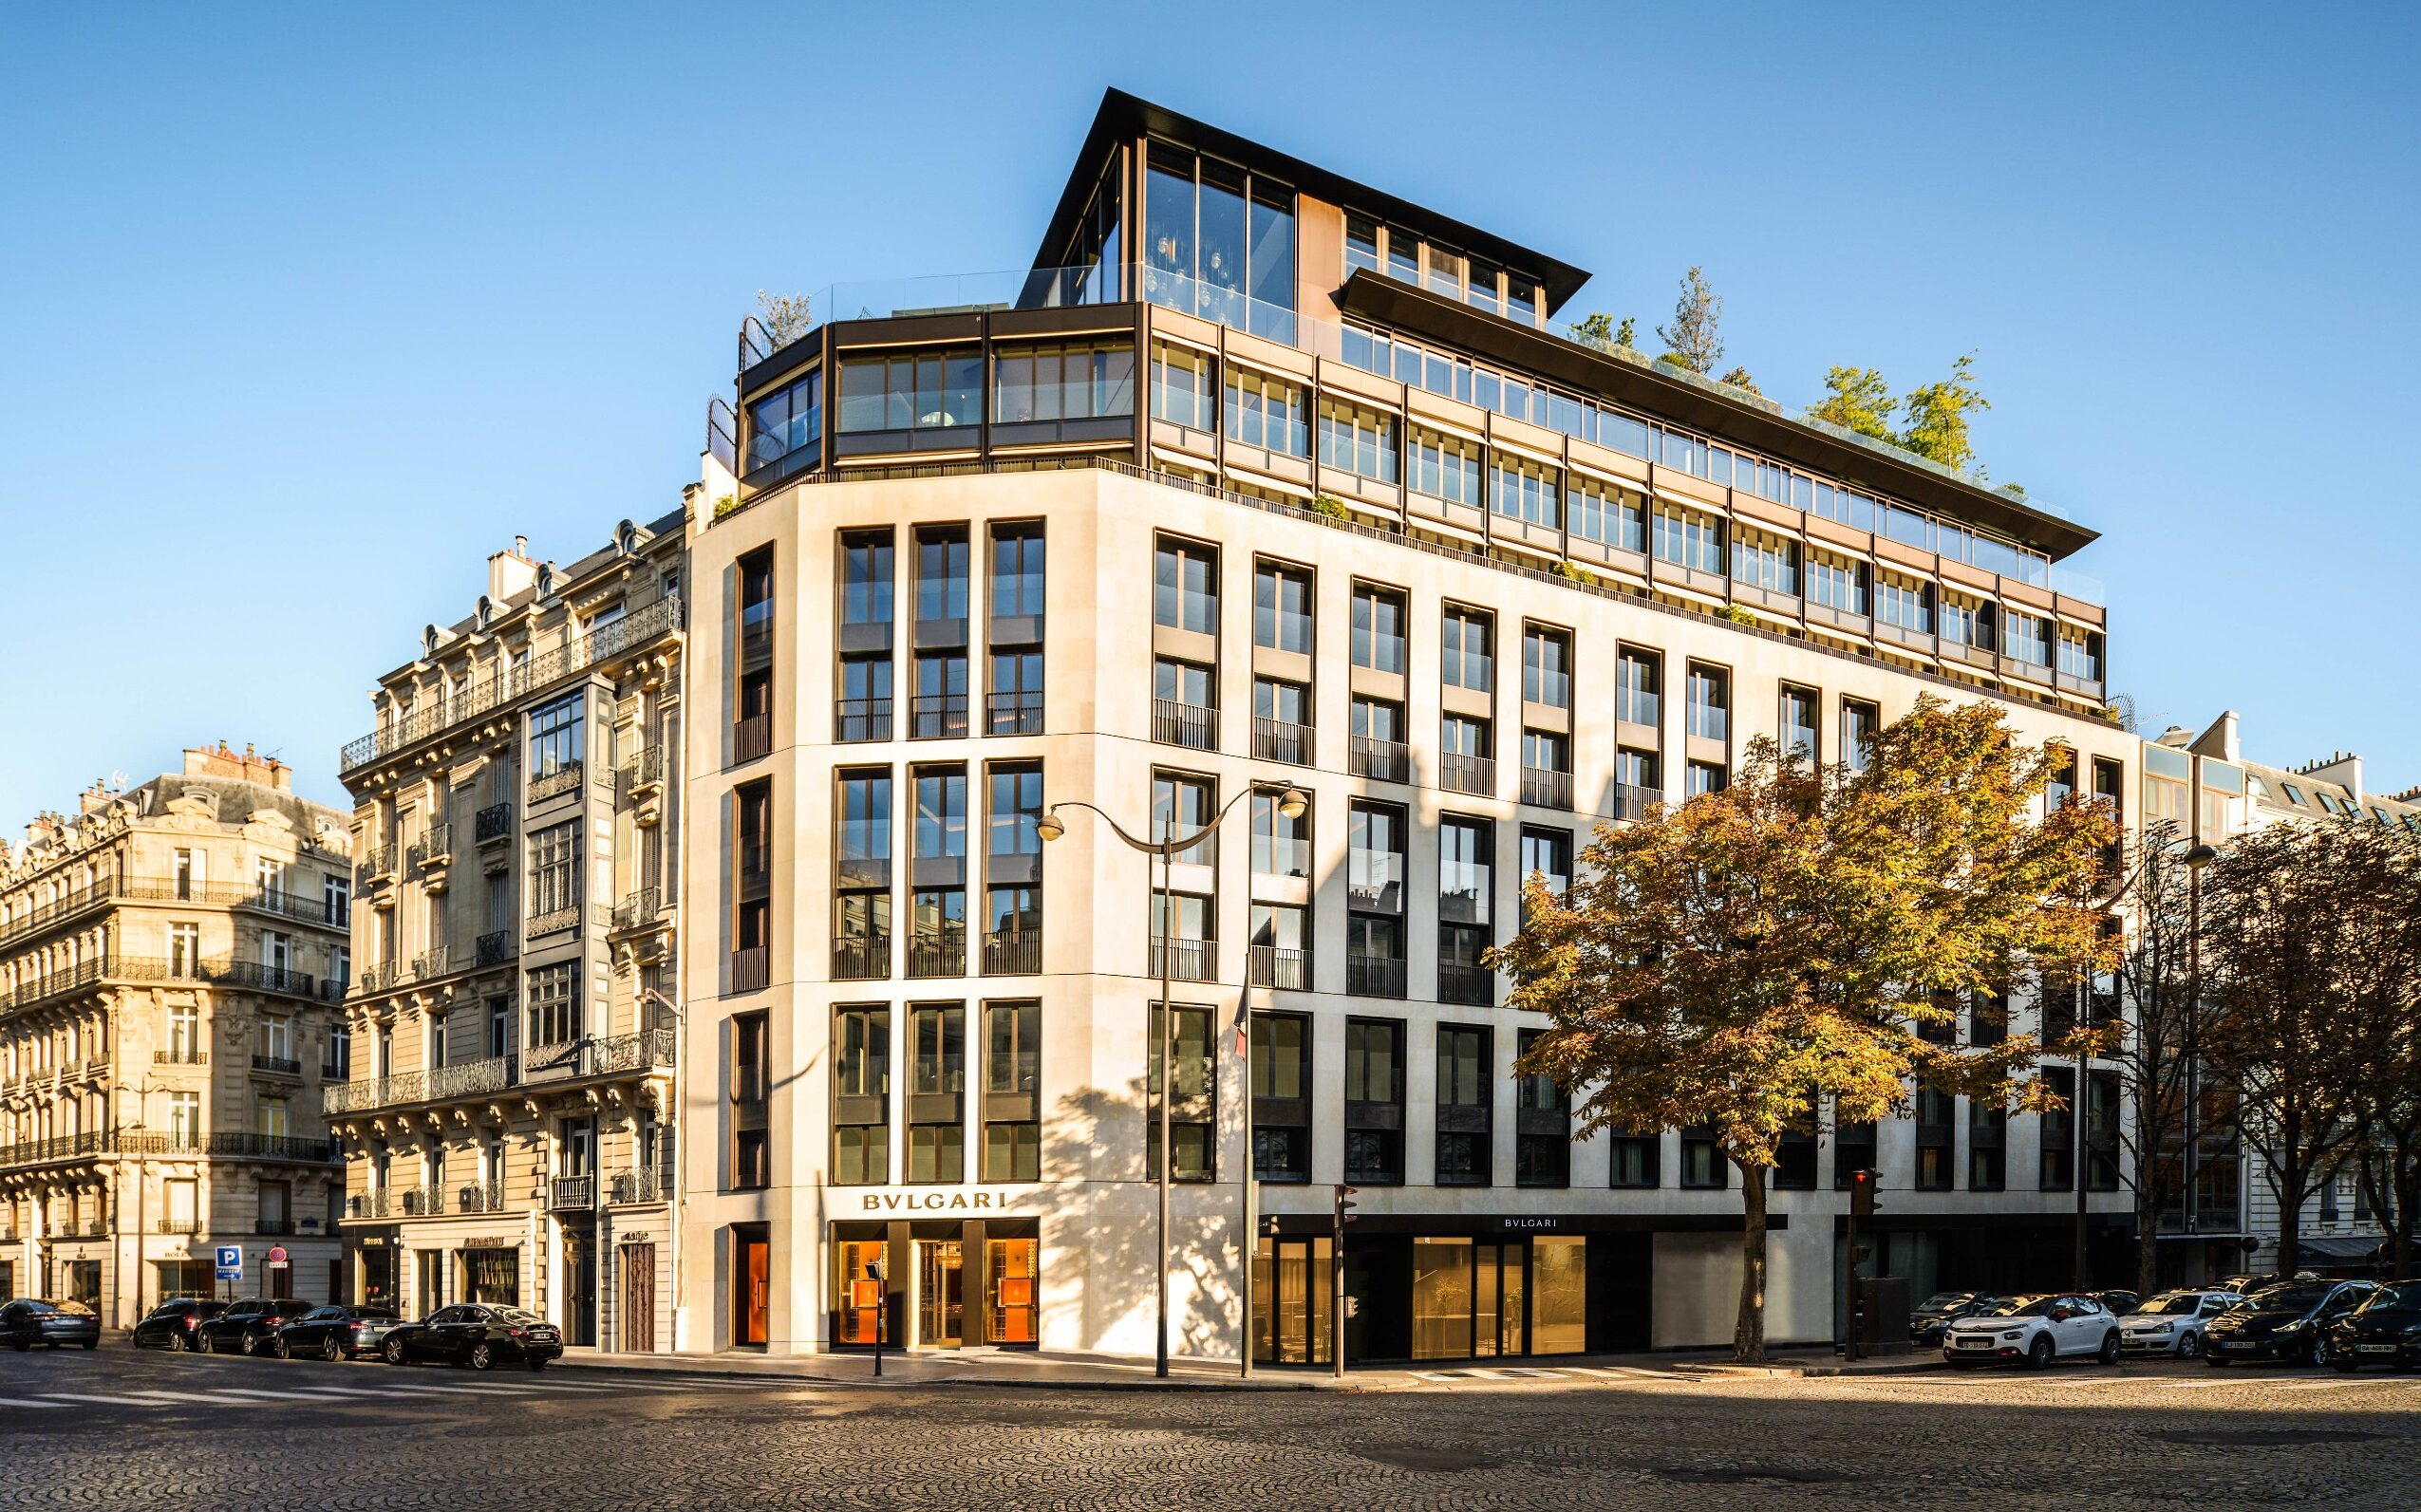 This Paris Hotel Run By a Magnificent Jeweler is Beloved By Celebrities and Socialites